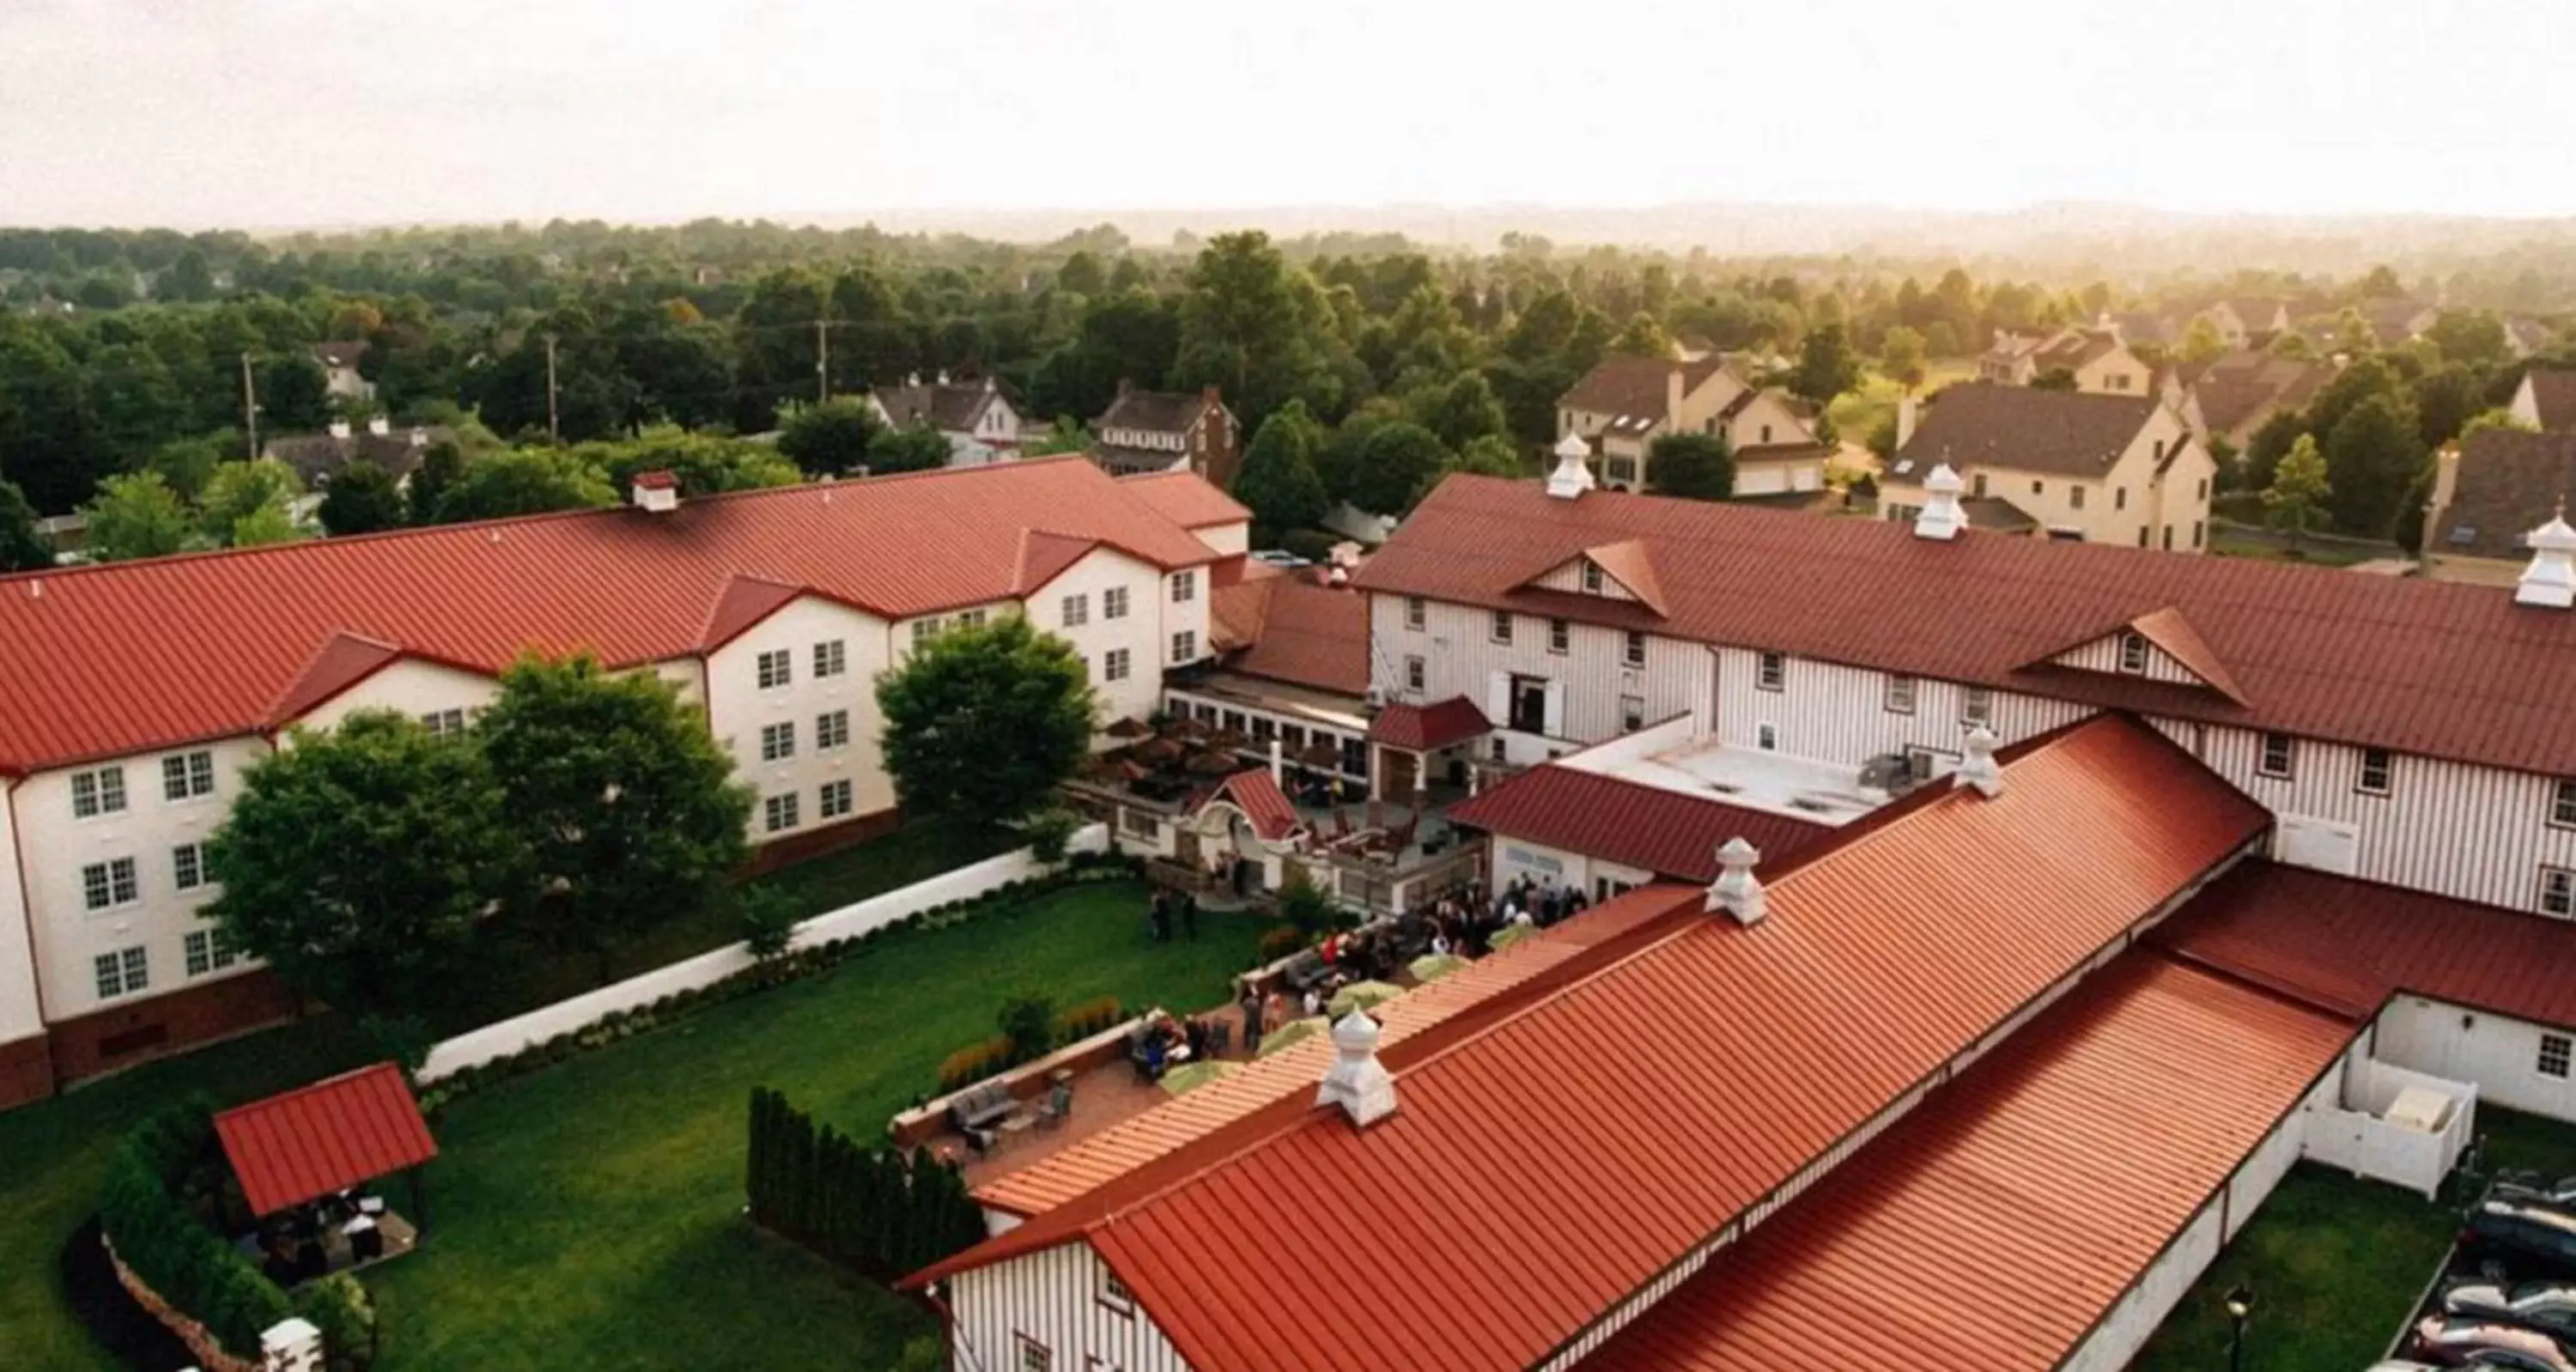 Day, Bird's-eye View in Normandy Farm Hotel & Conference Center